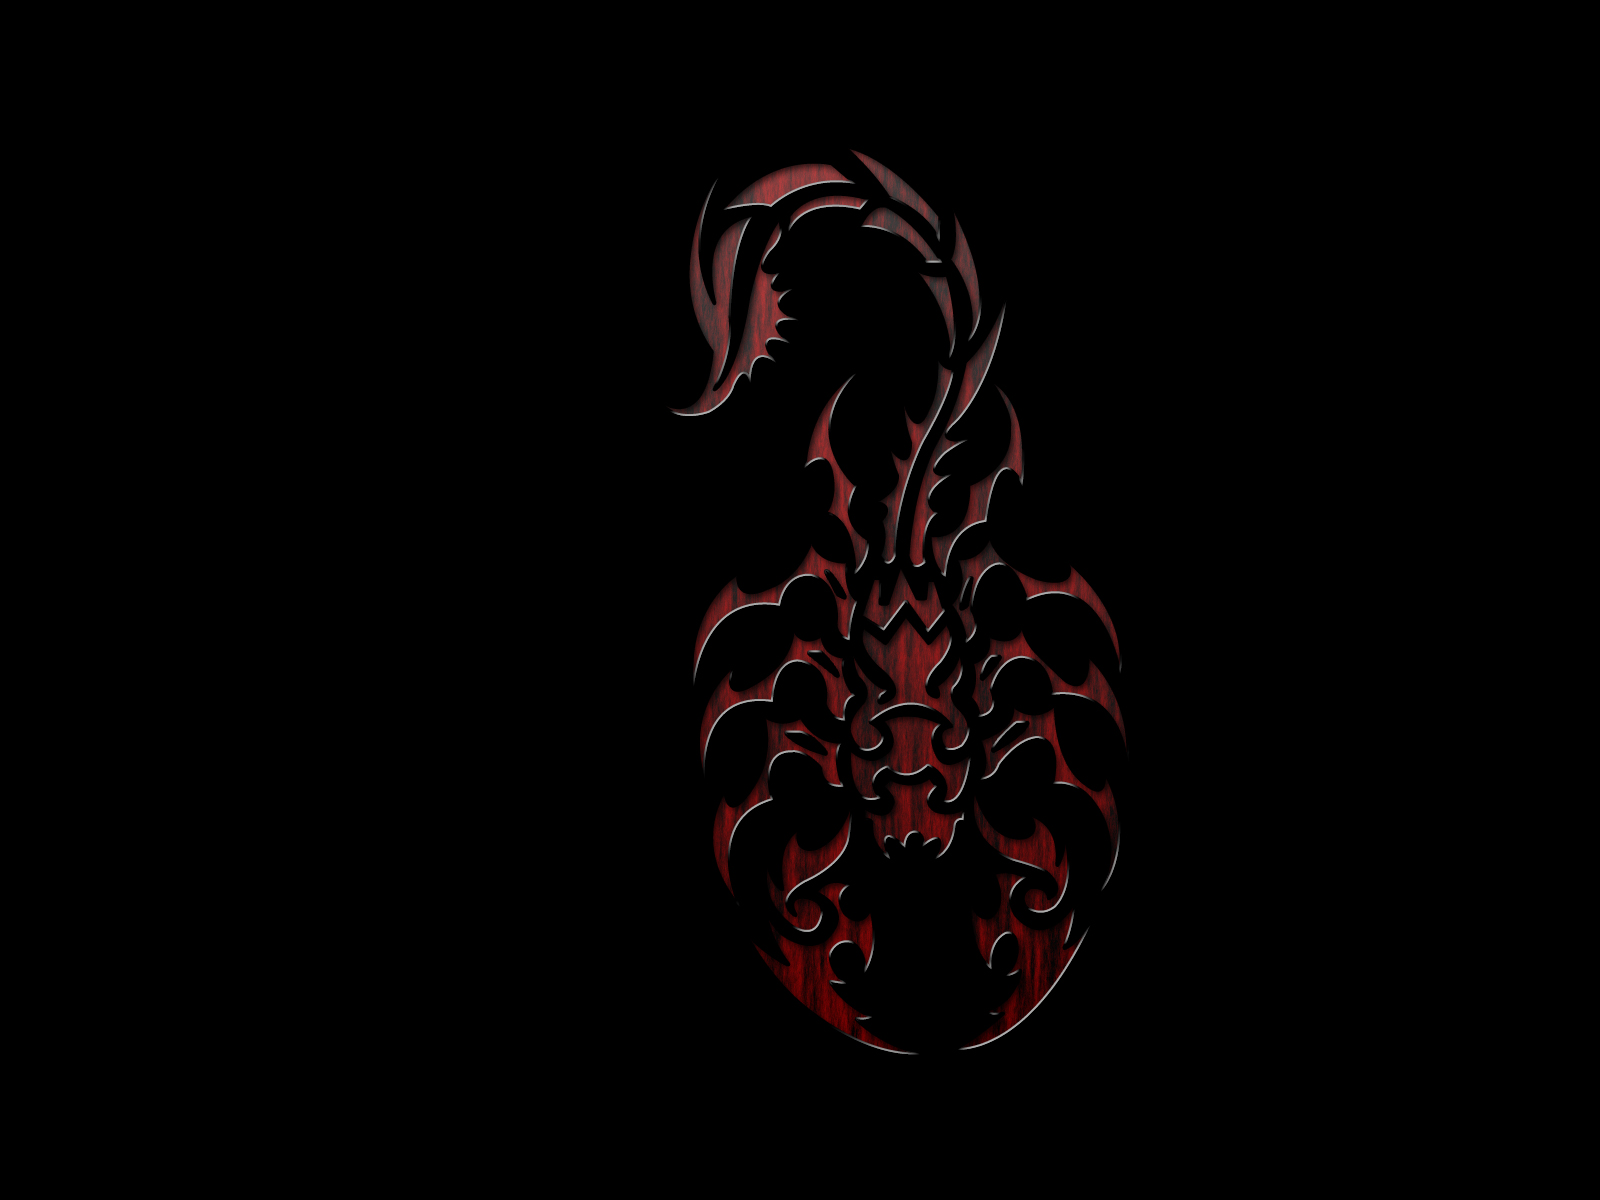 Scorpion Abstract Wallpaper Android Bhstorm